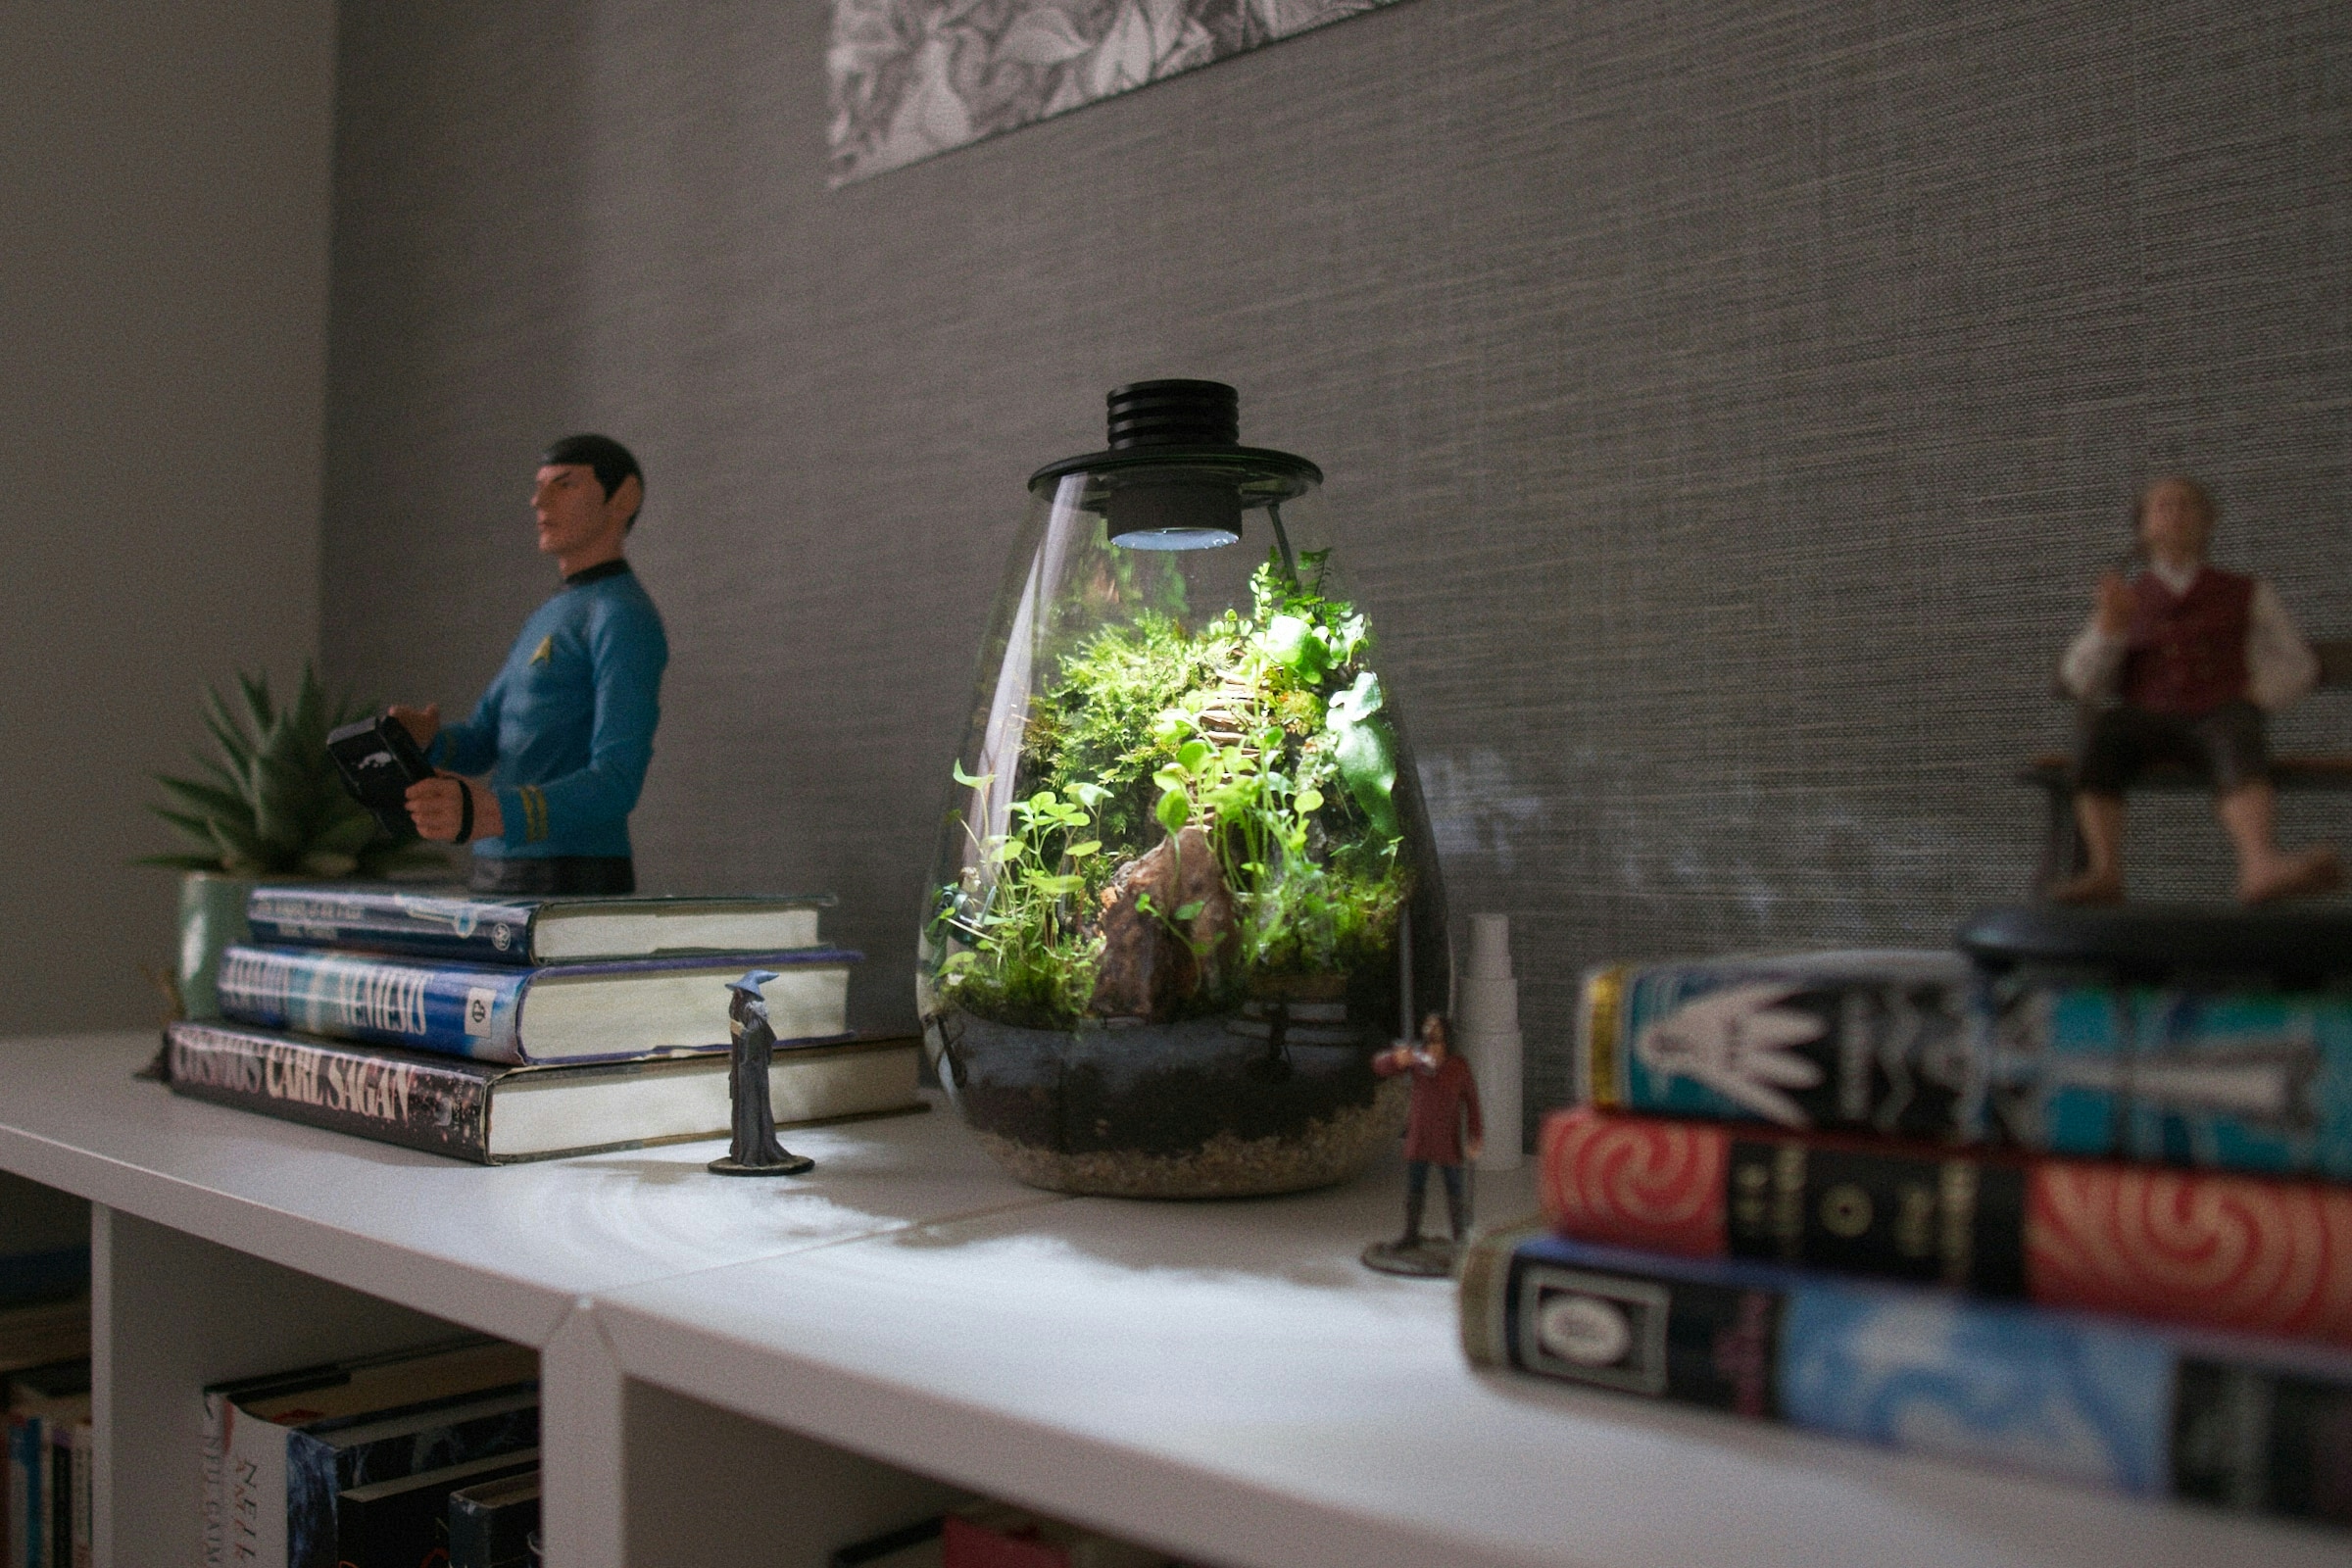 Terrarium next to book piles and some some miniatures figures of Bilbo, Gandalf, Aragorn, and Mr. Spock